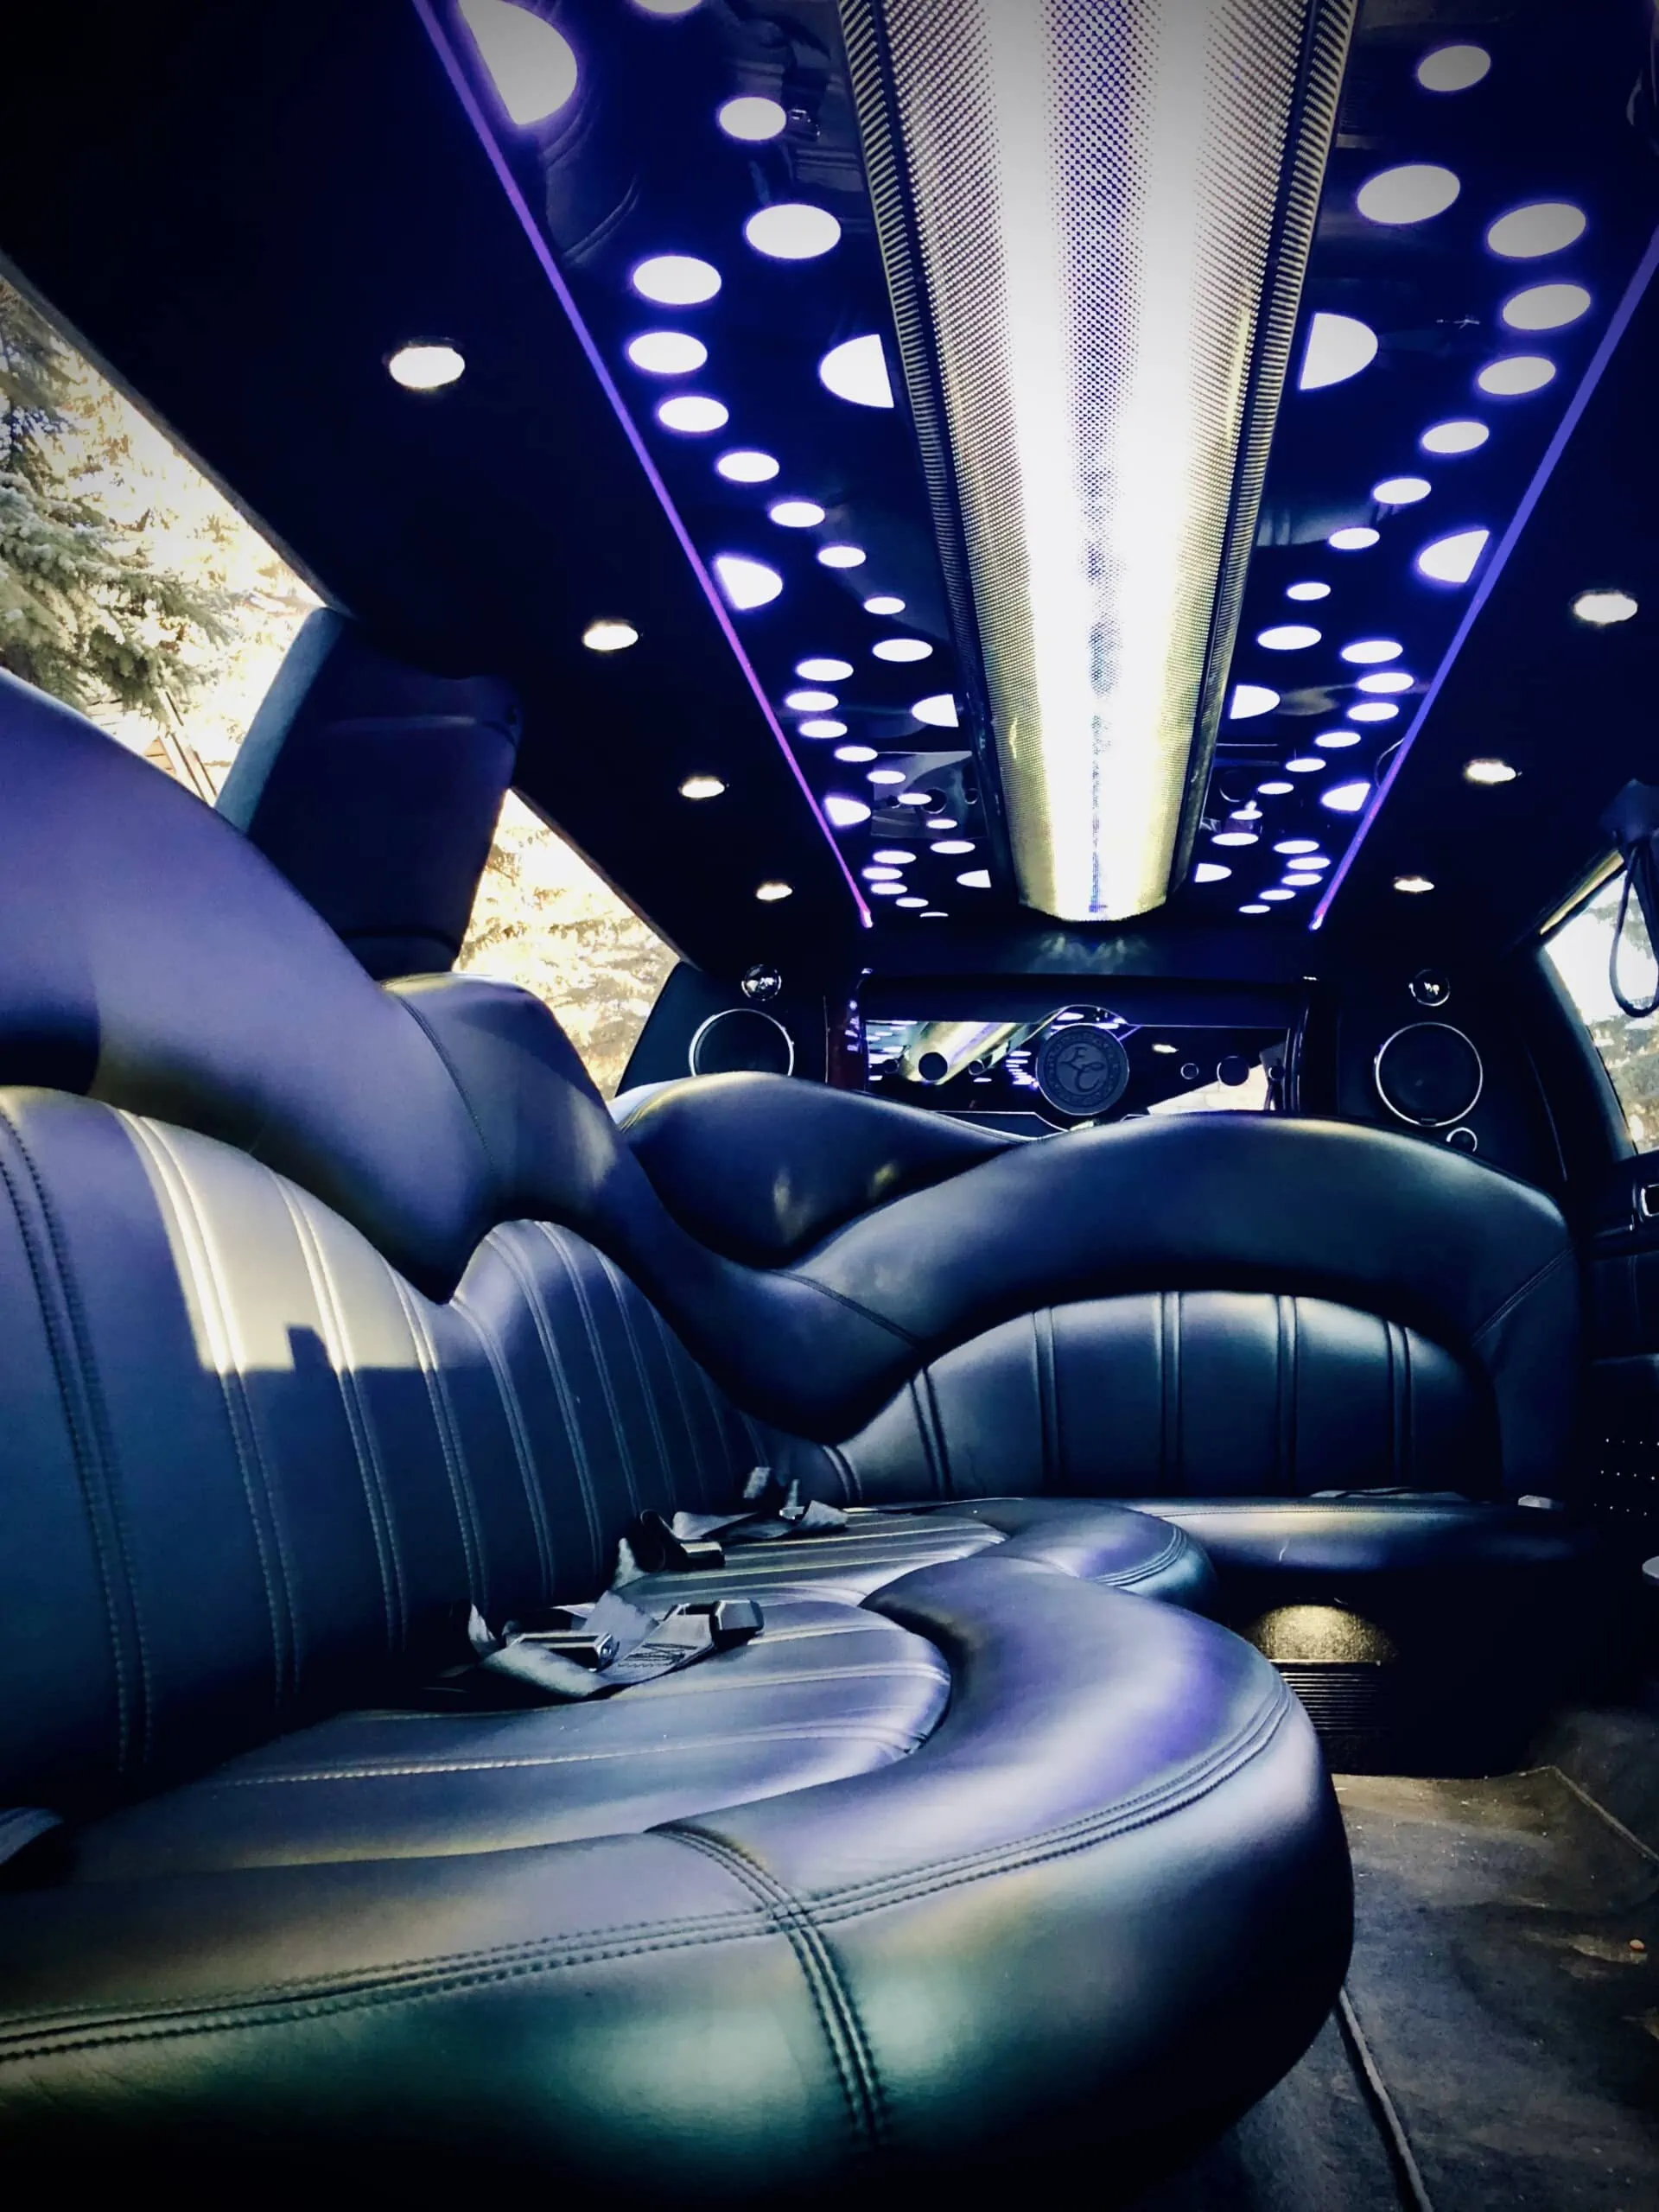 What is a limousine and what is a stretch limousine?